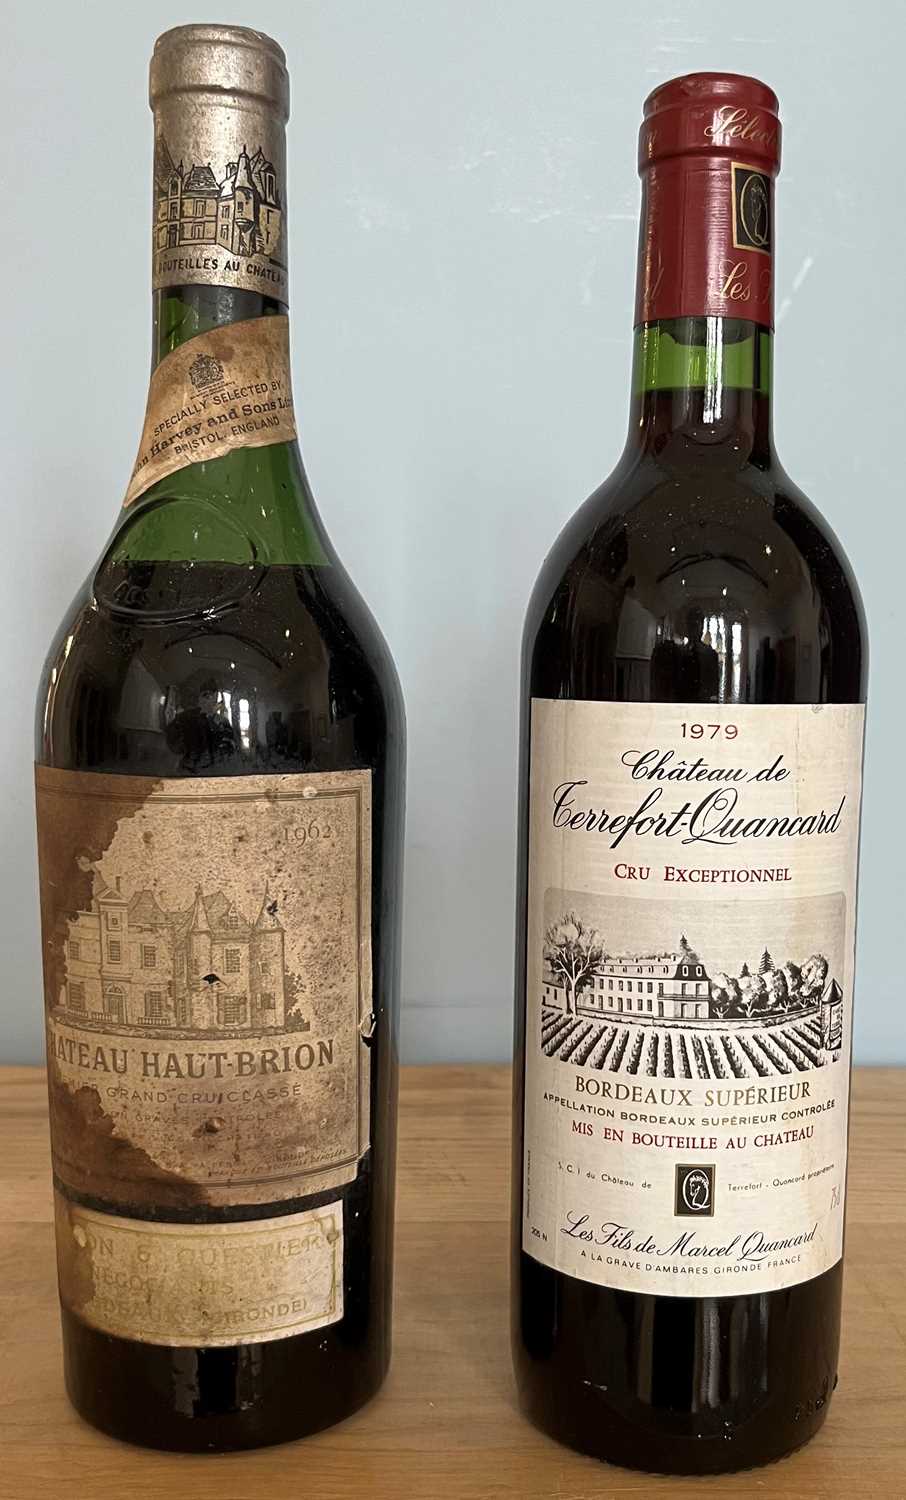 Lot 11 - 2 bottles of Chateau